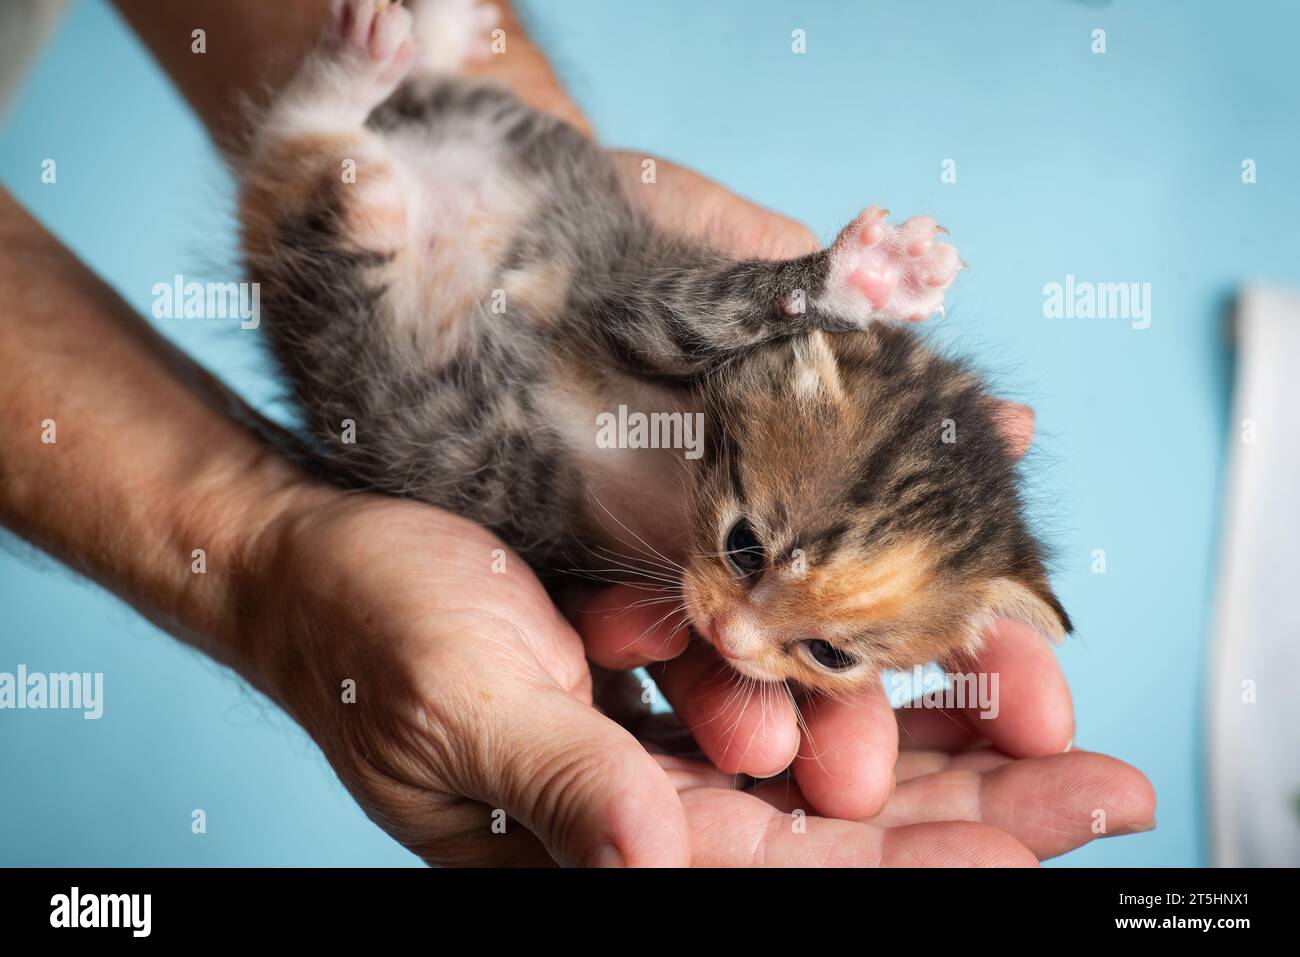 Fragile newborn colorful kitten in a man's hand Stock Photo